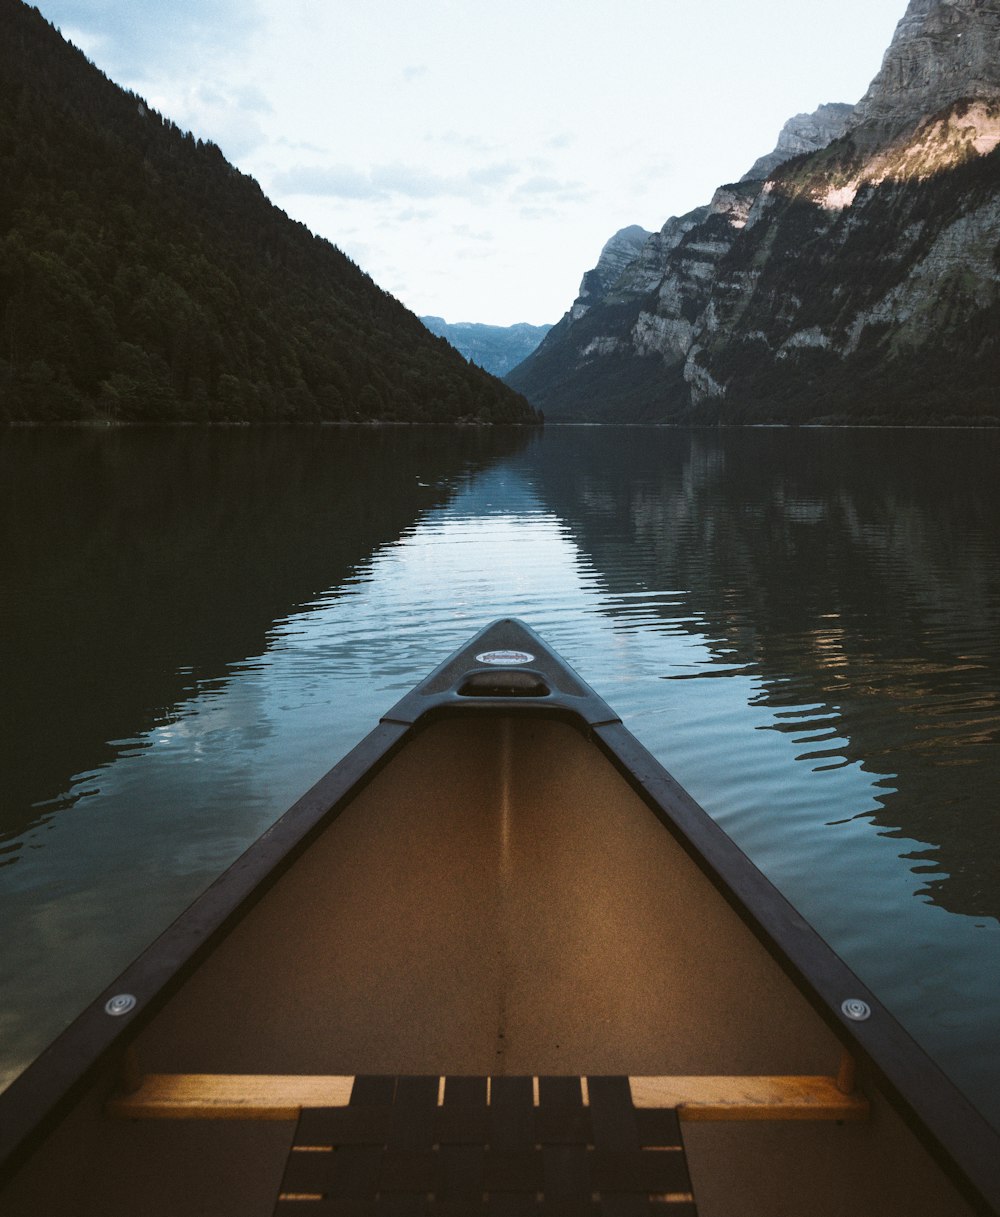 canoe on body of water with mountain background